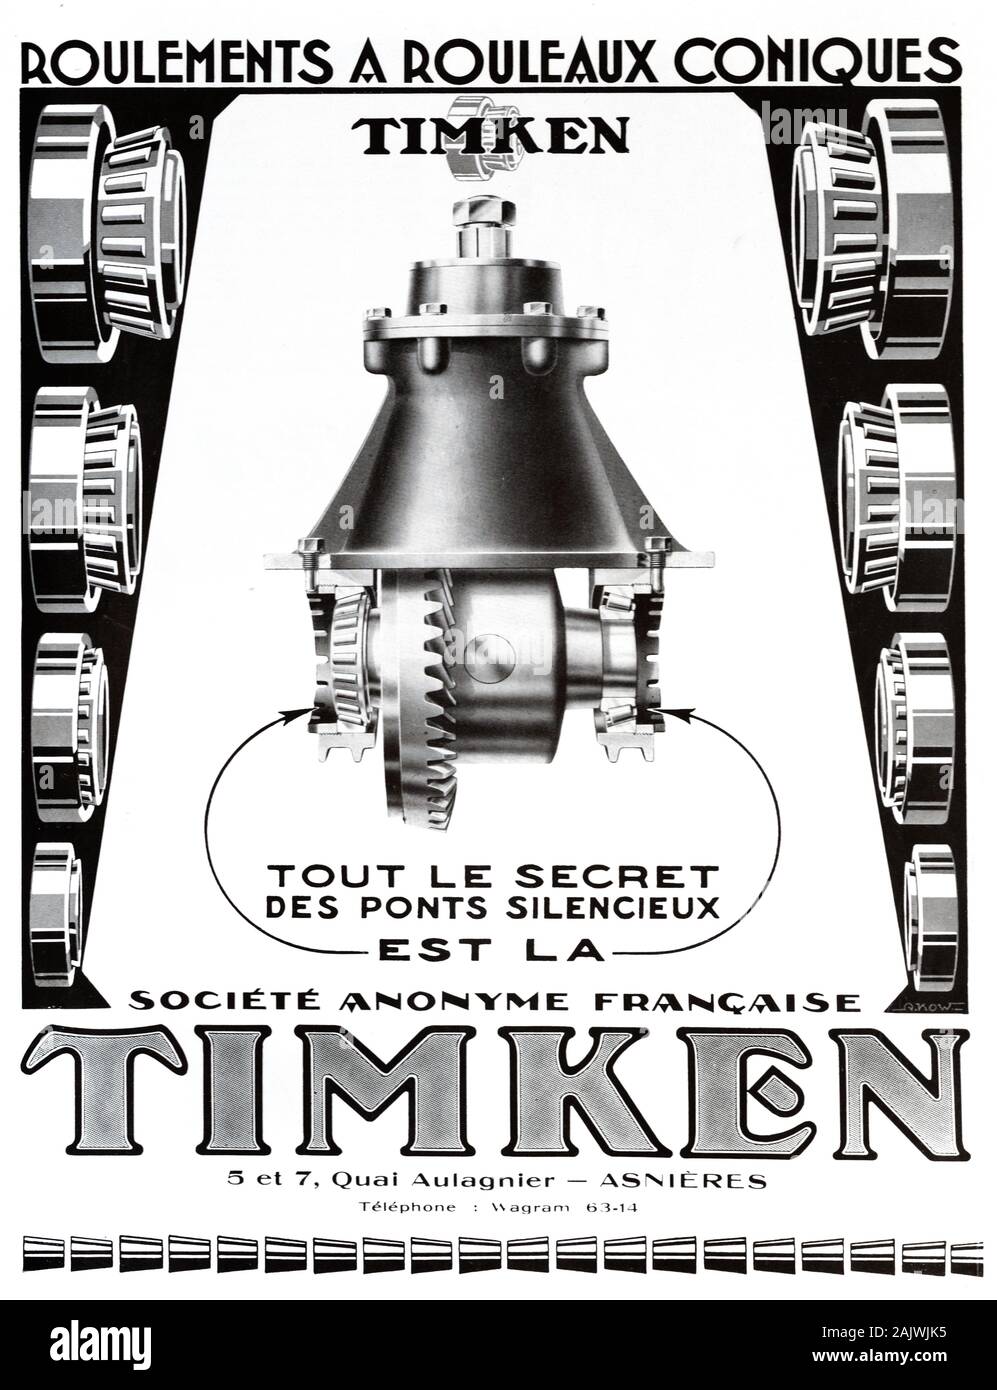 Vintage Advert, Old Advert, Advertisement or Publicity for Timken Gear Boxes, Gear Box or Transmission. Advert 1929 Stock Photo